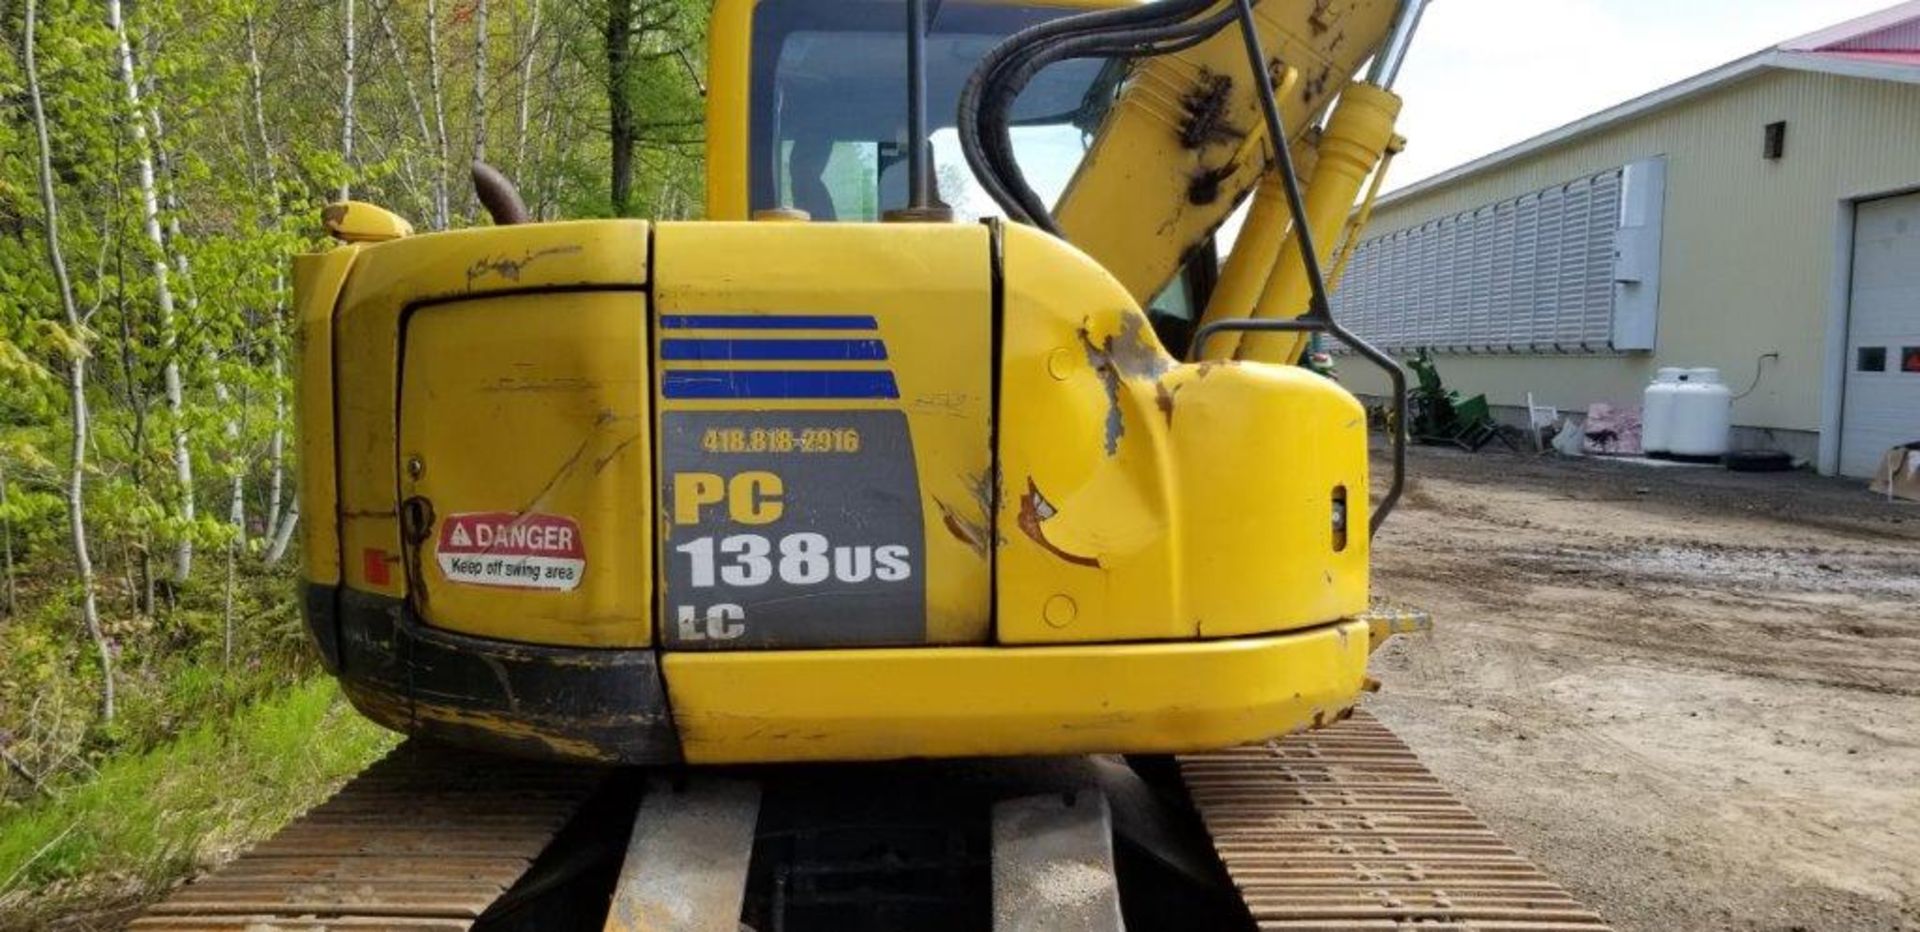 KOMATSU Excavator, mod: PC138, ns: 20554, 2007 (see photos for details) - Image 6 of 9